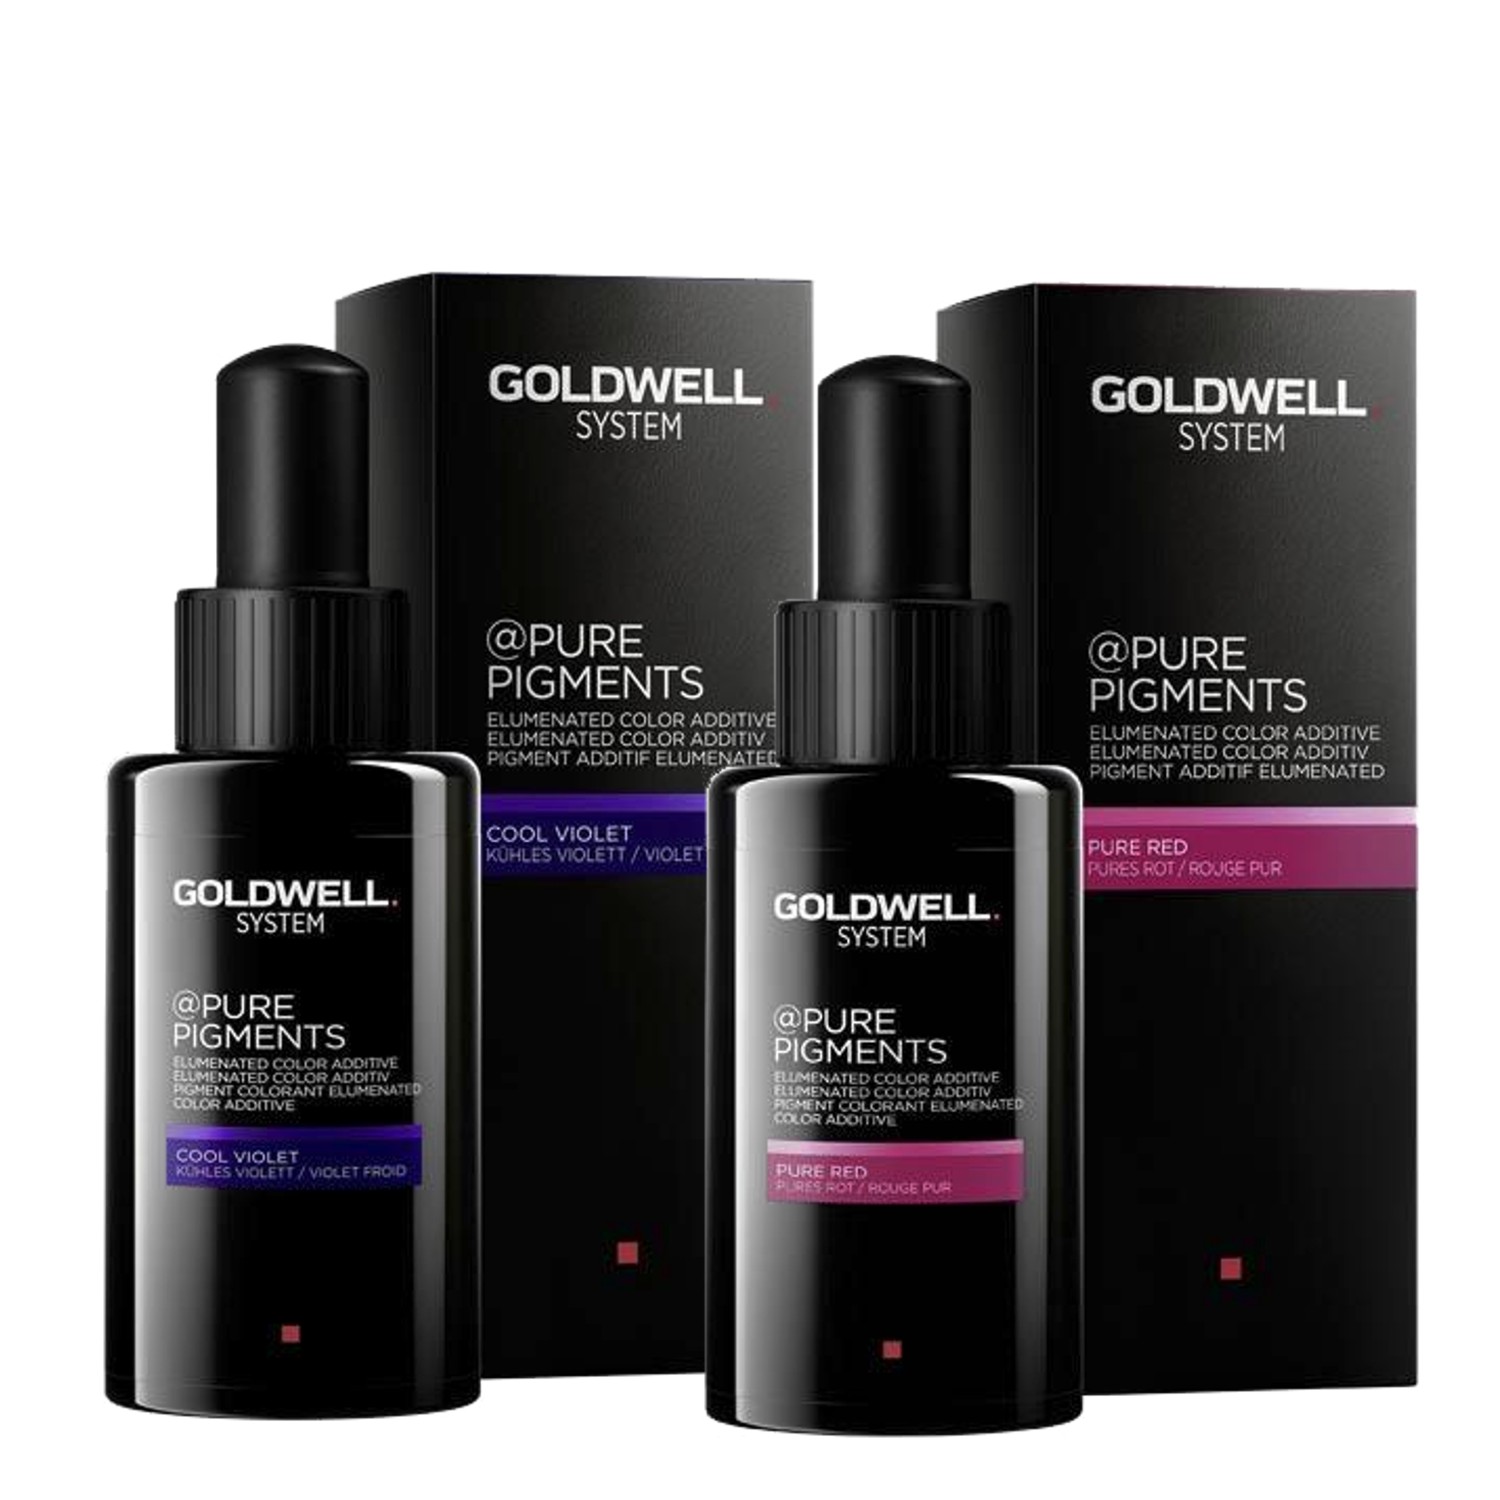 GOLDWELL System @Pure Pigments 50 ml